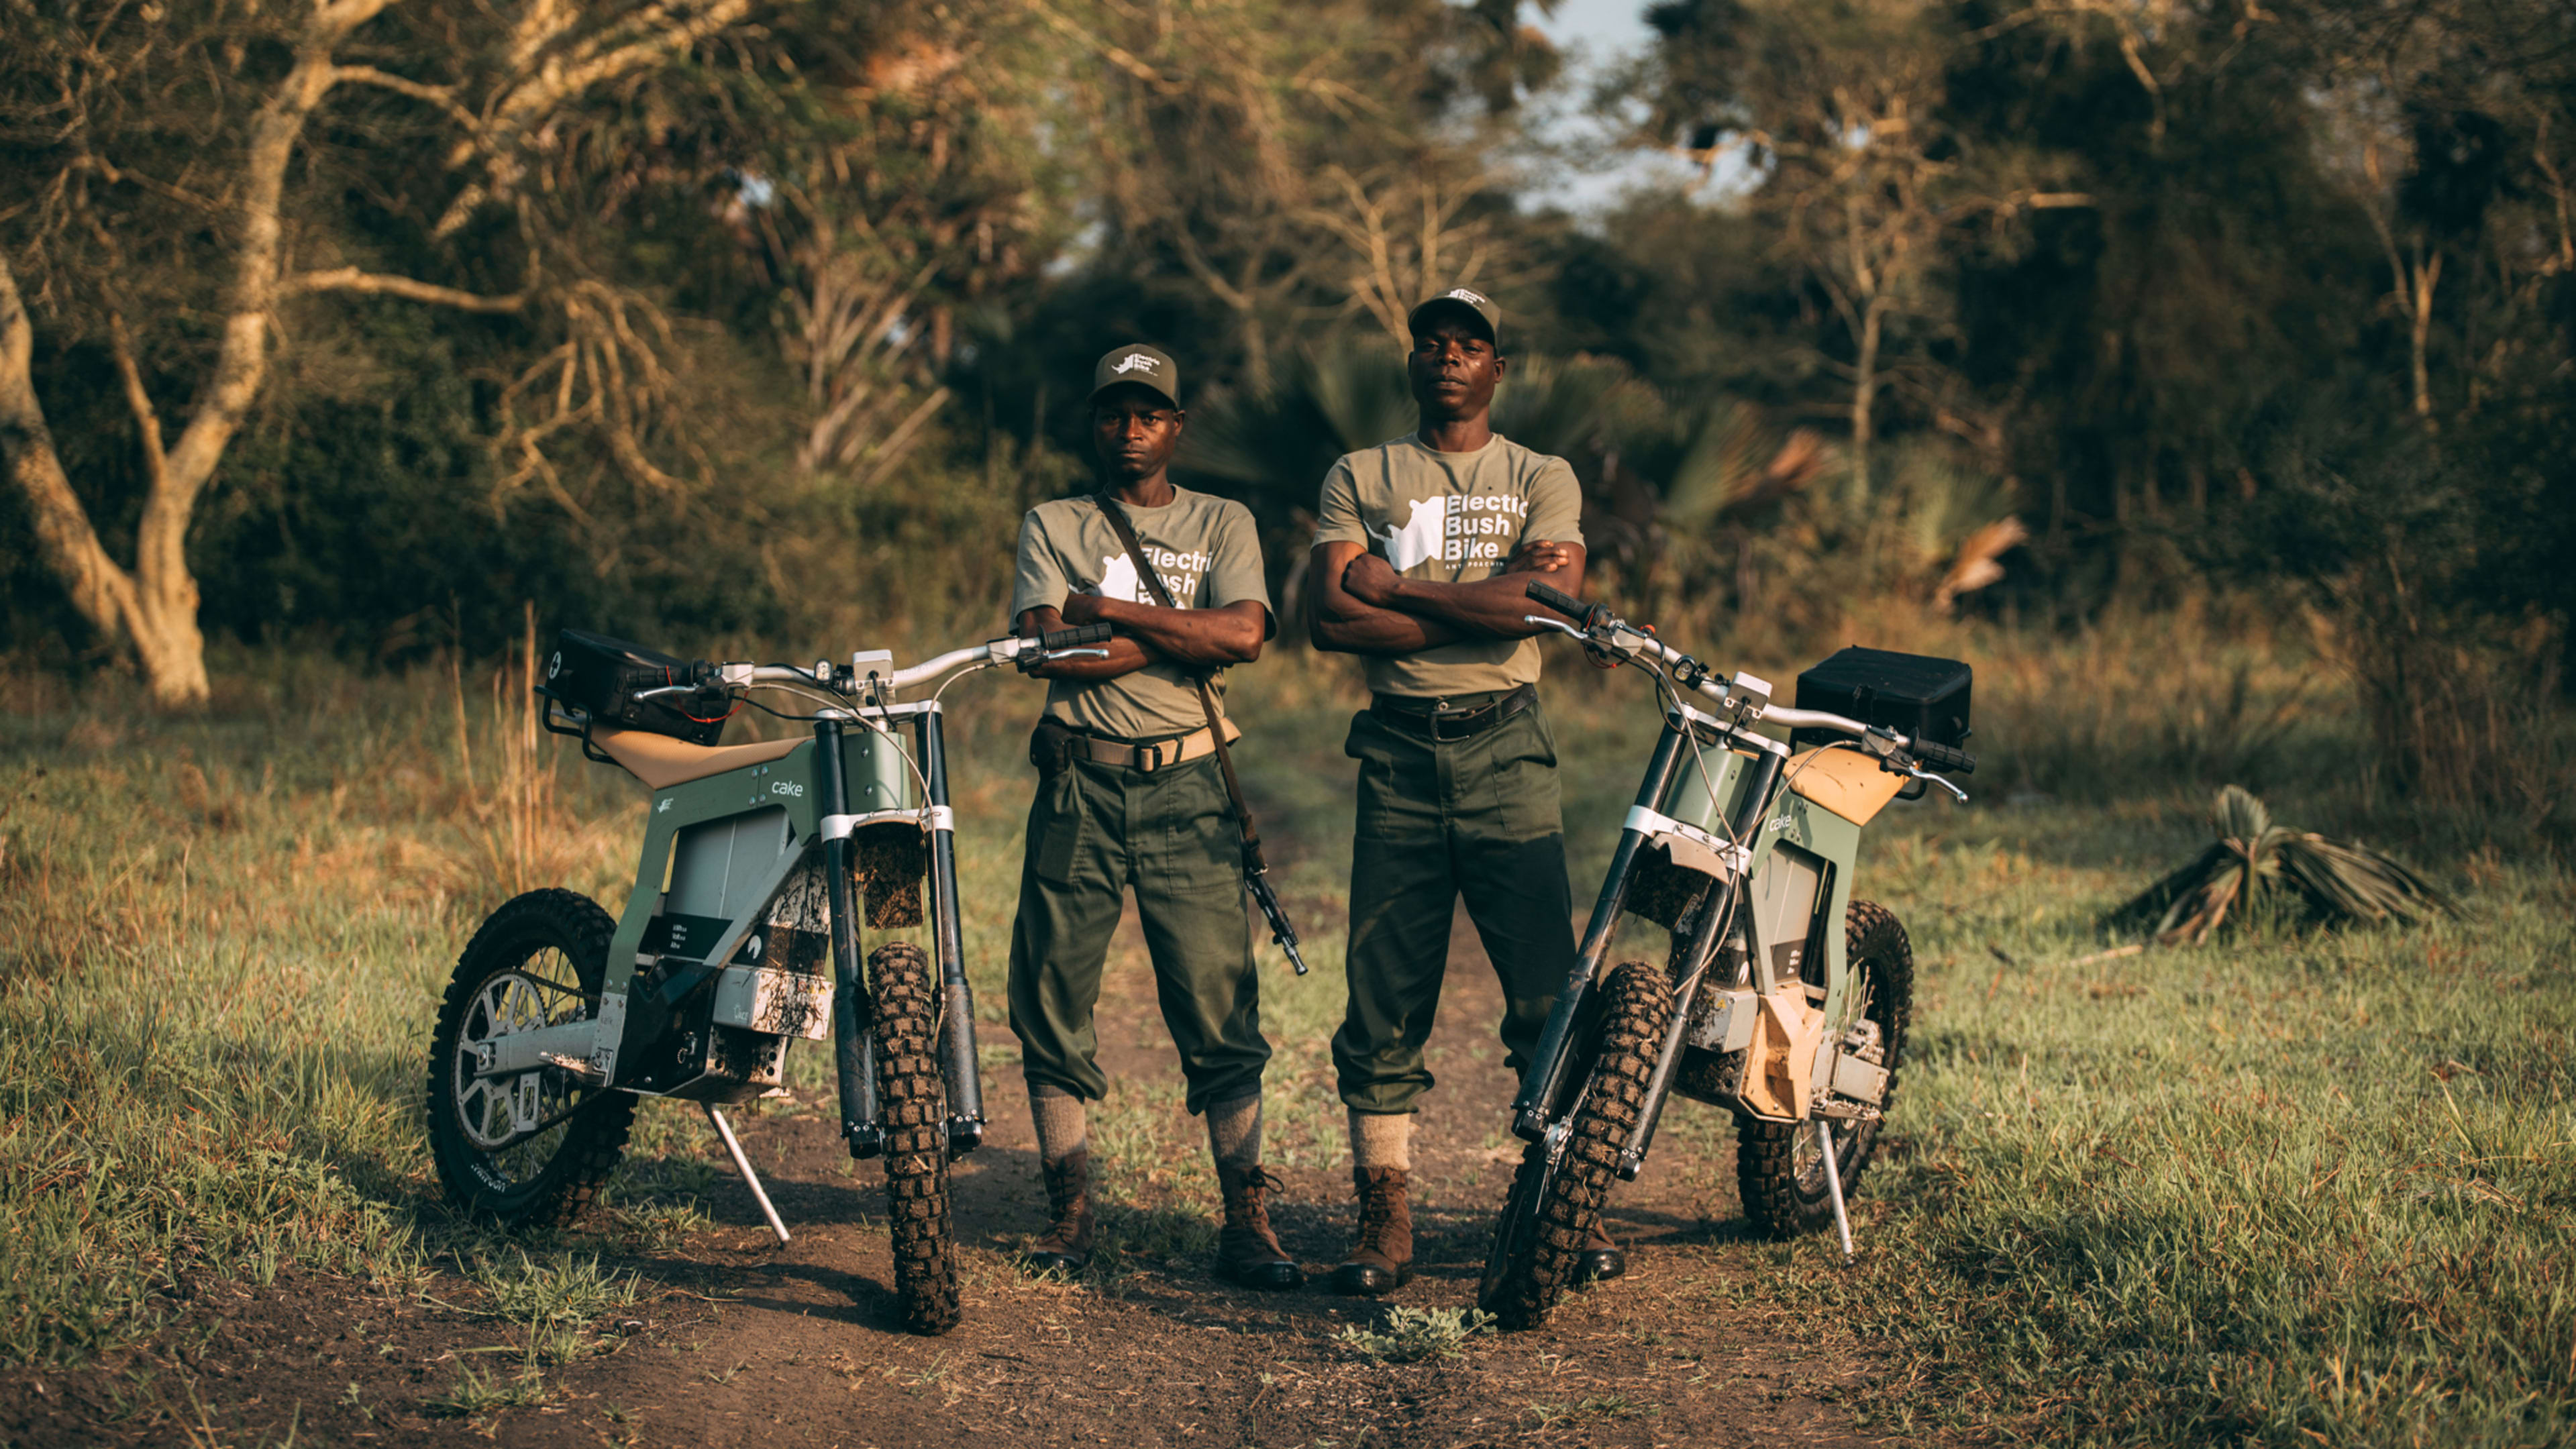 South African rangers are using these electric motorcycles to silently catch poachers